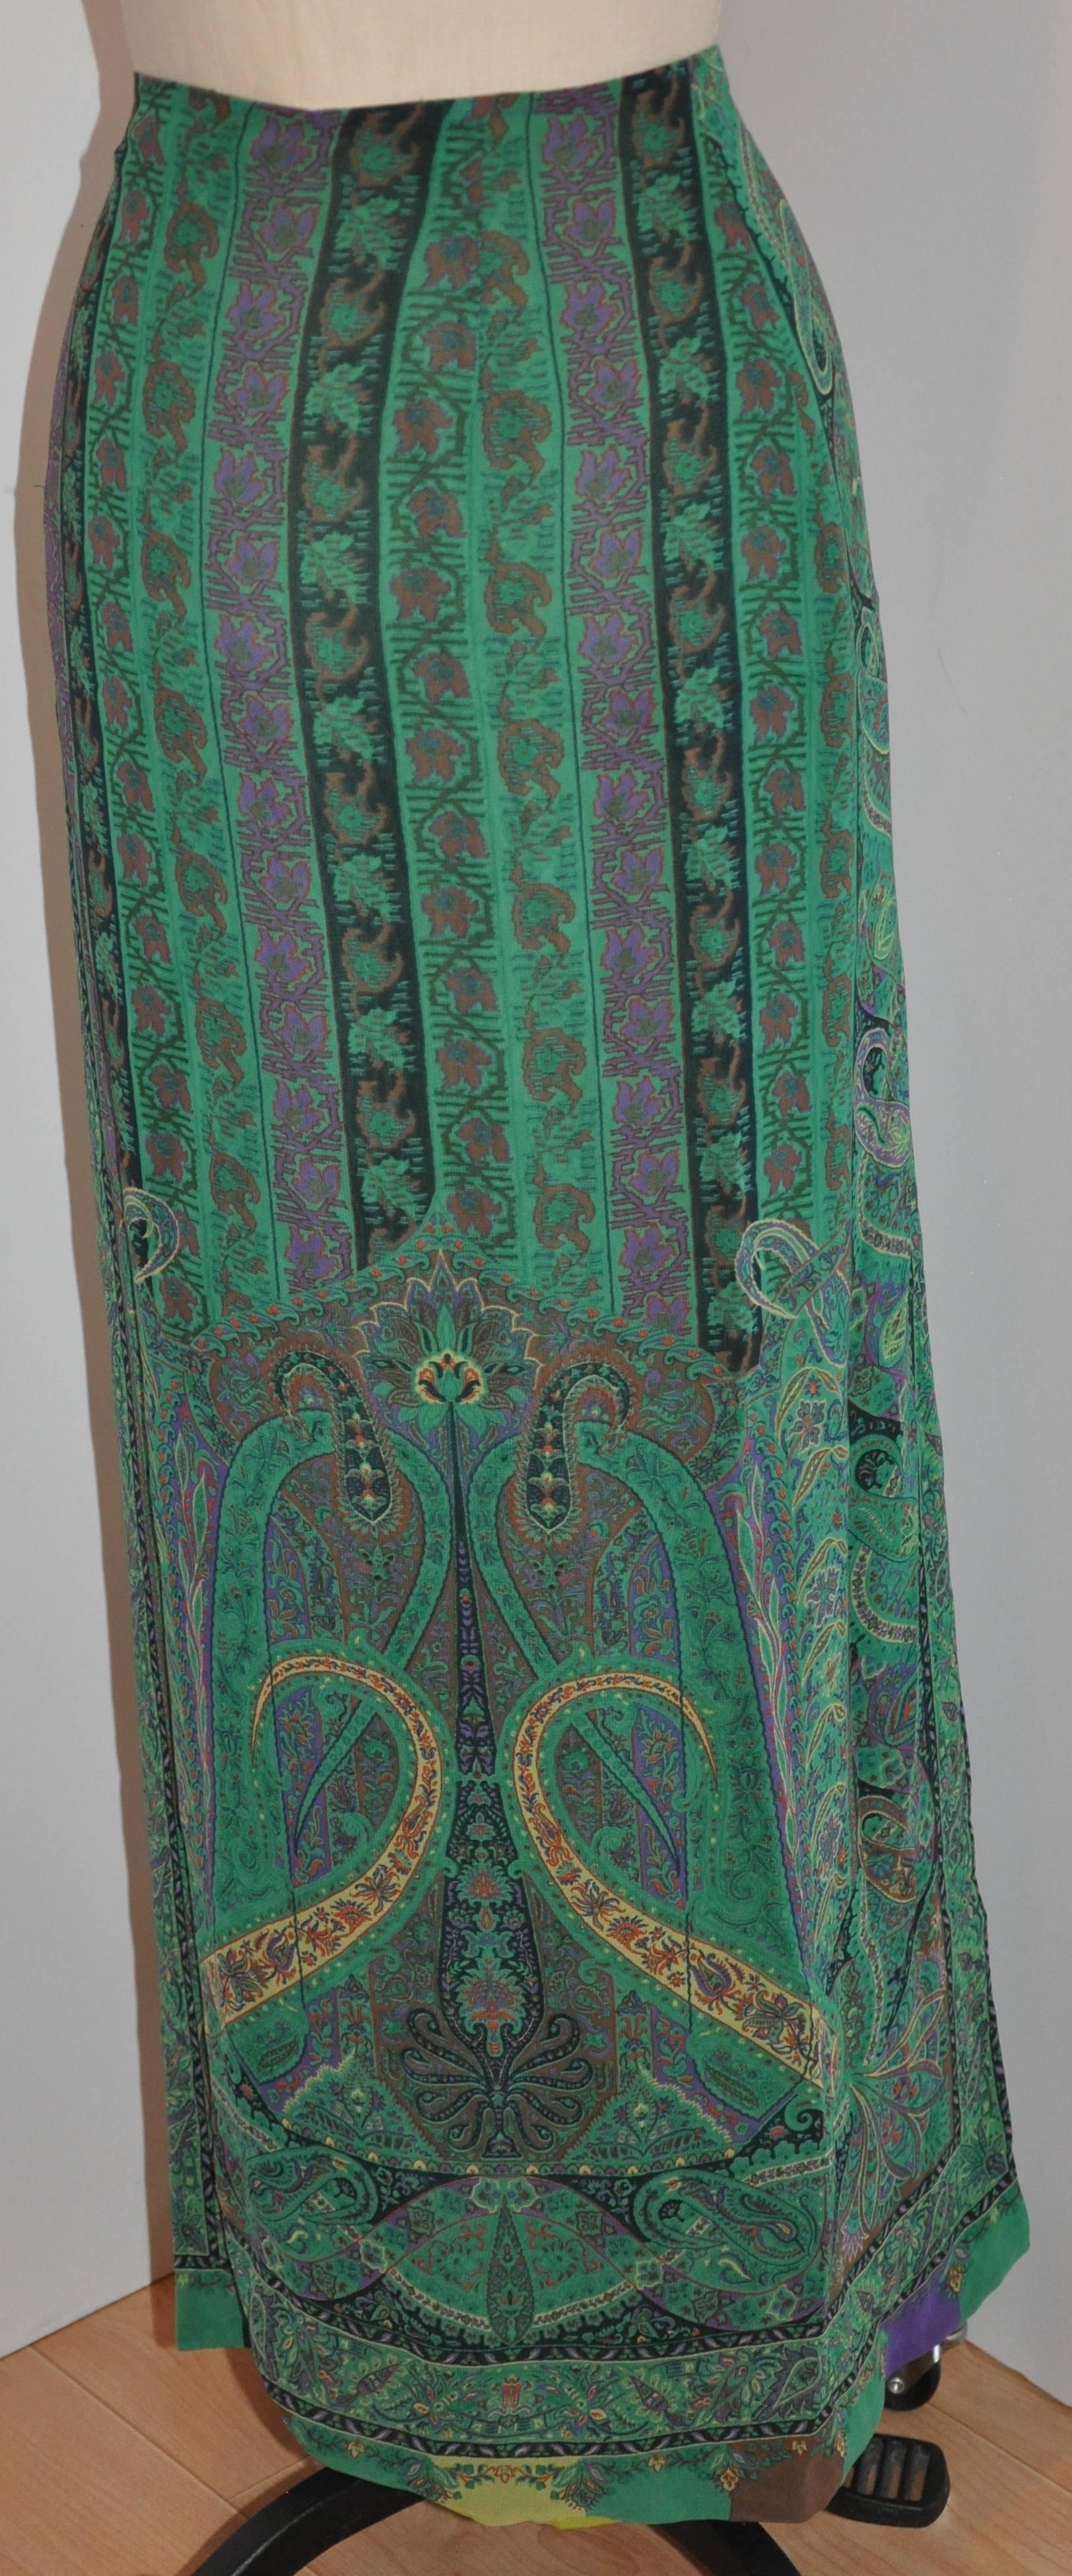           Etro Multi-greens of palsey and floral maxi skirt measures 39